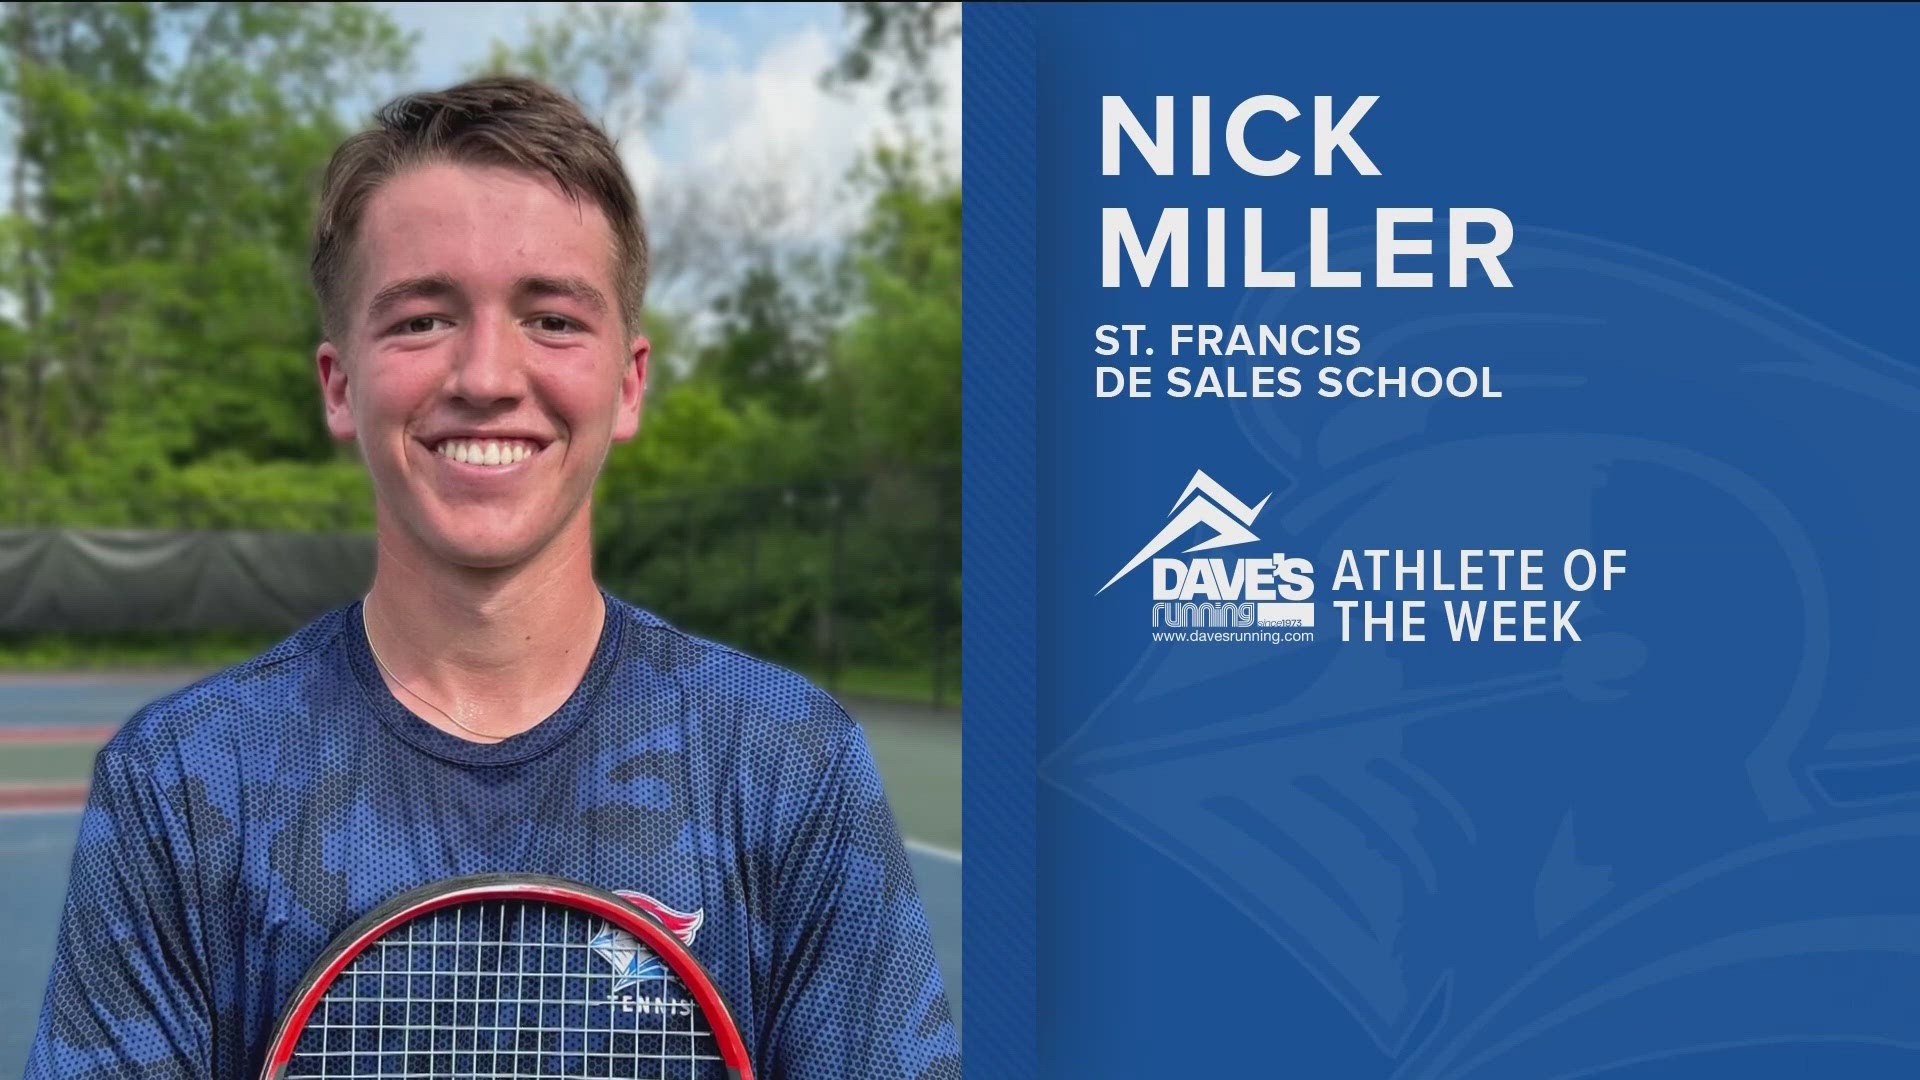 Nick Miller made the switch this season from doubles to singles tennis.
In fact, Miller was the only local singles player in Division I to qualify for states.